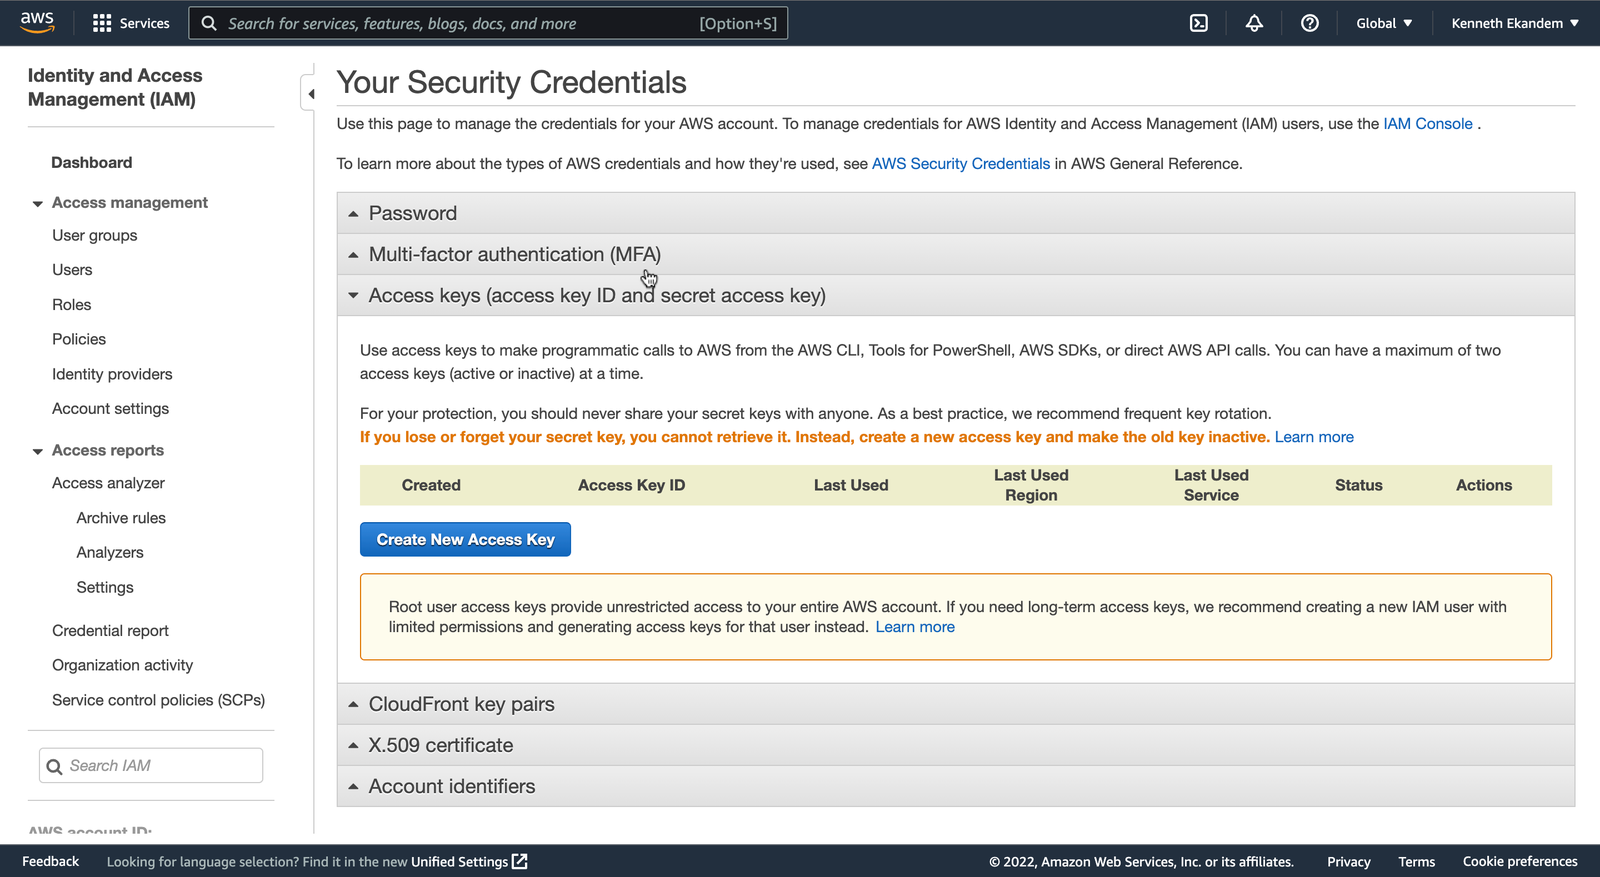 View security credentials in AWS IAM